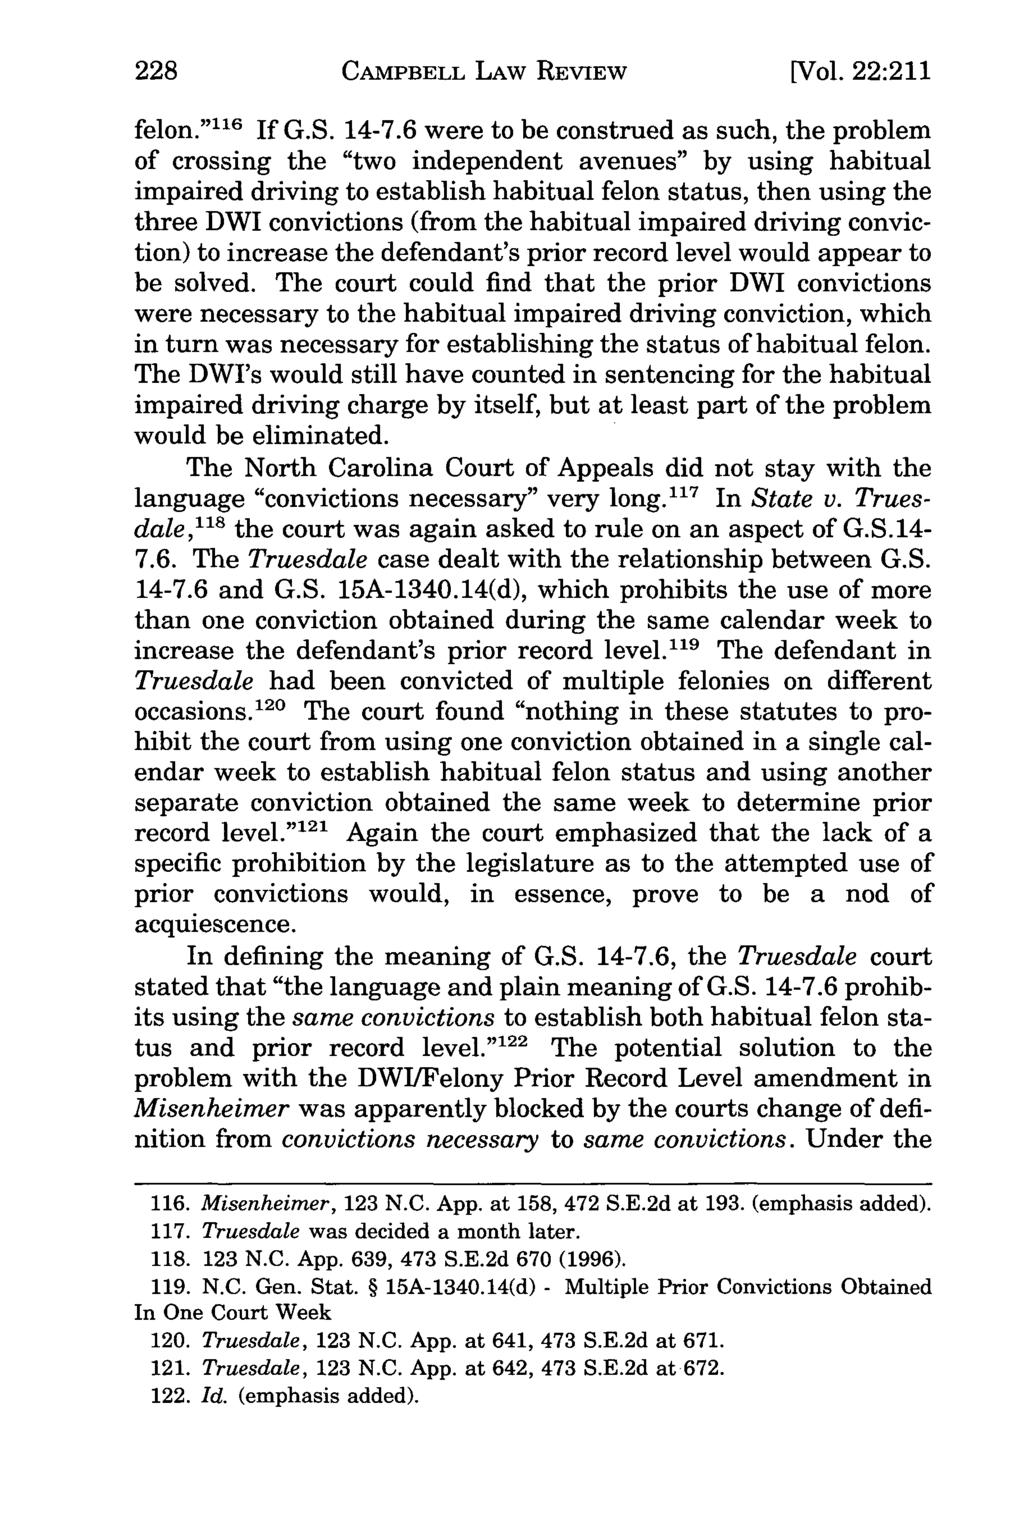 228 Campbell Law Review, Vol. 22, Iss. 1 [1999], Art. 7 CAMPBELL LAW REVIEW [Vol. 22:211 felon." 11 6 If G.S. 14-7.